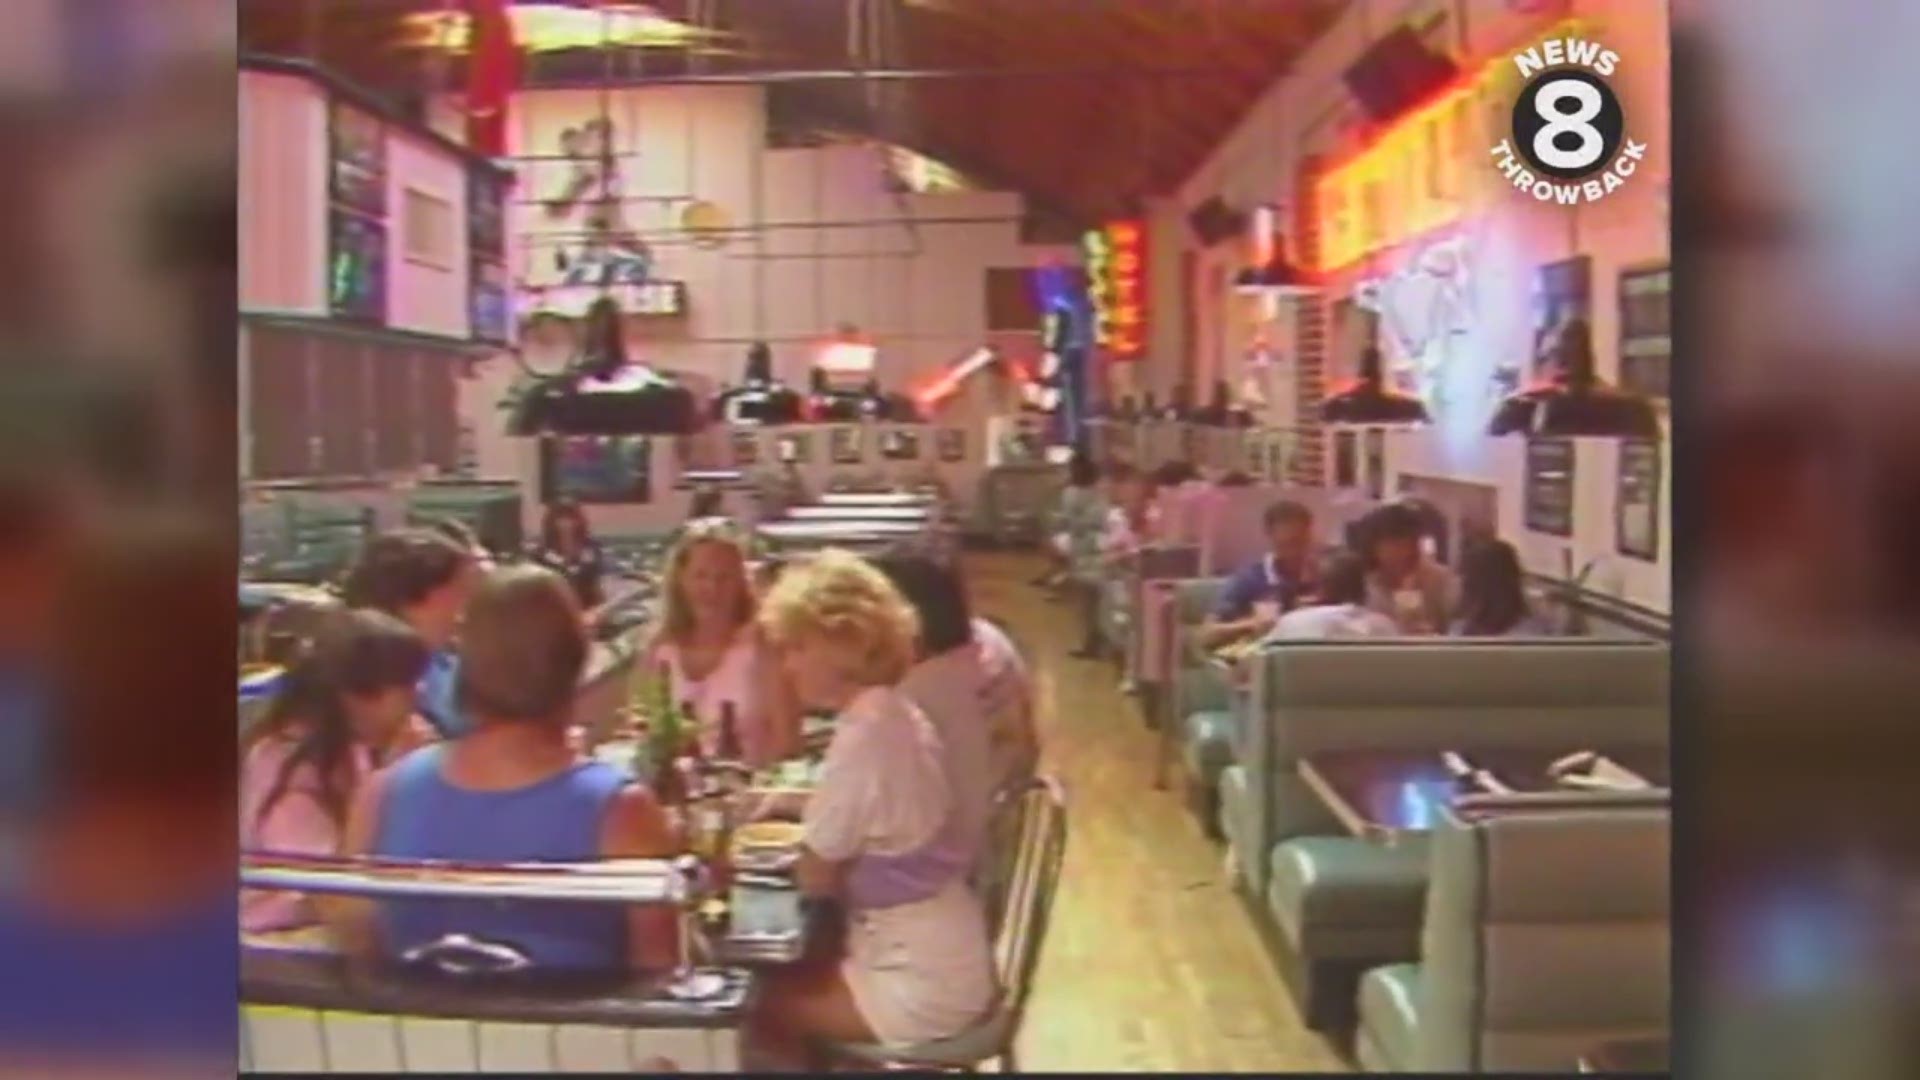 The Unknown Eater reviews San Diego's Corvette Diner in 1988